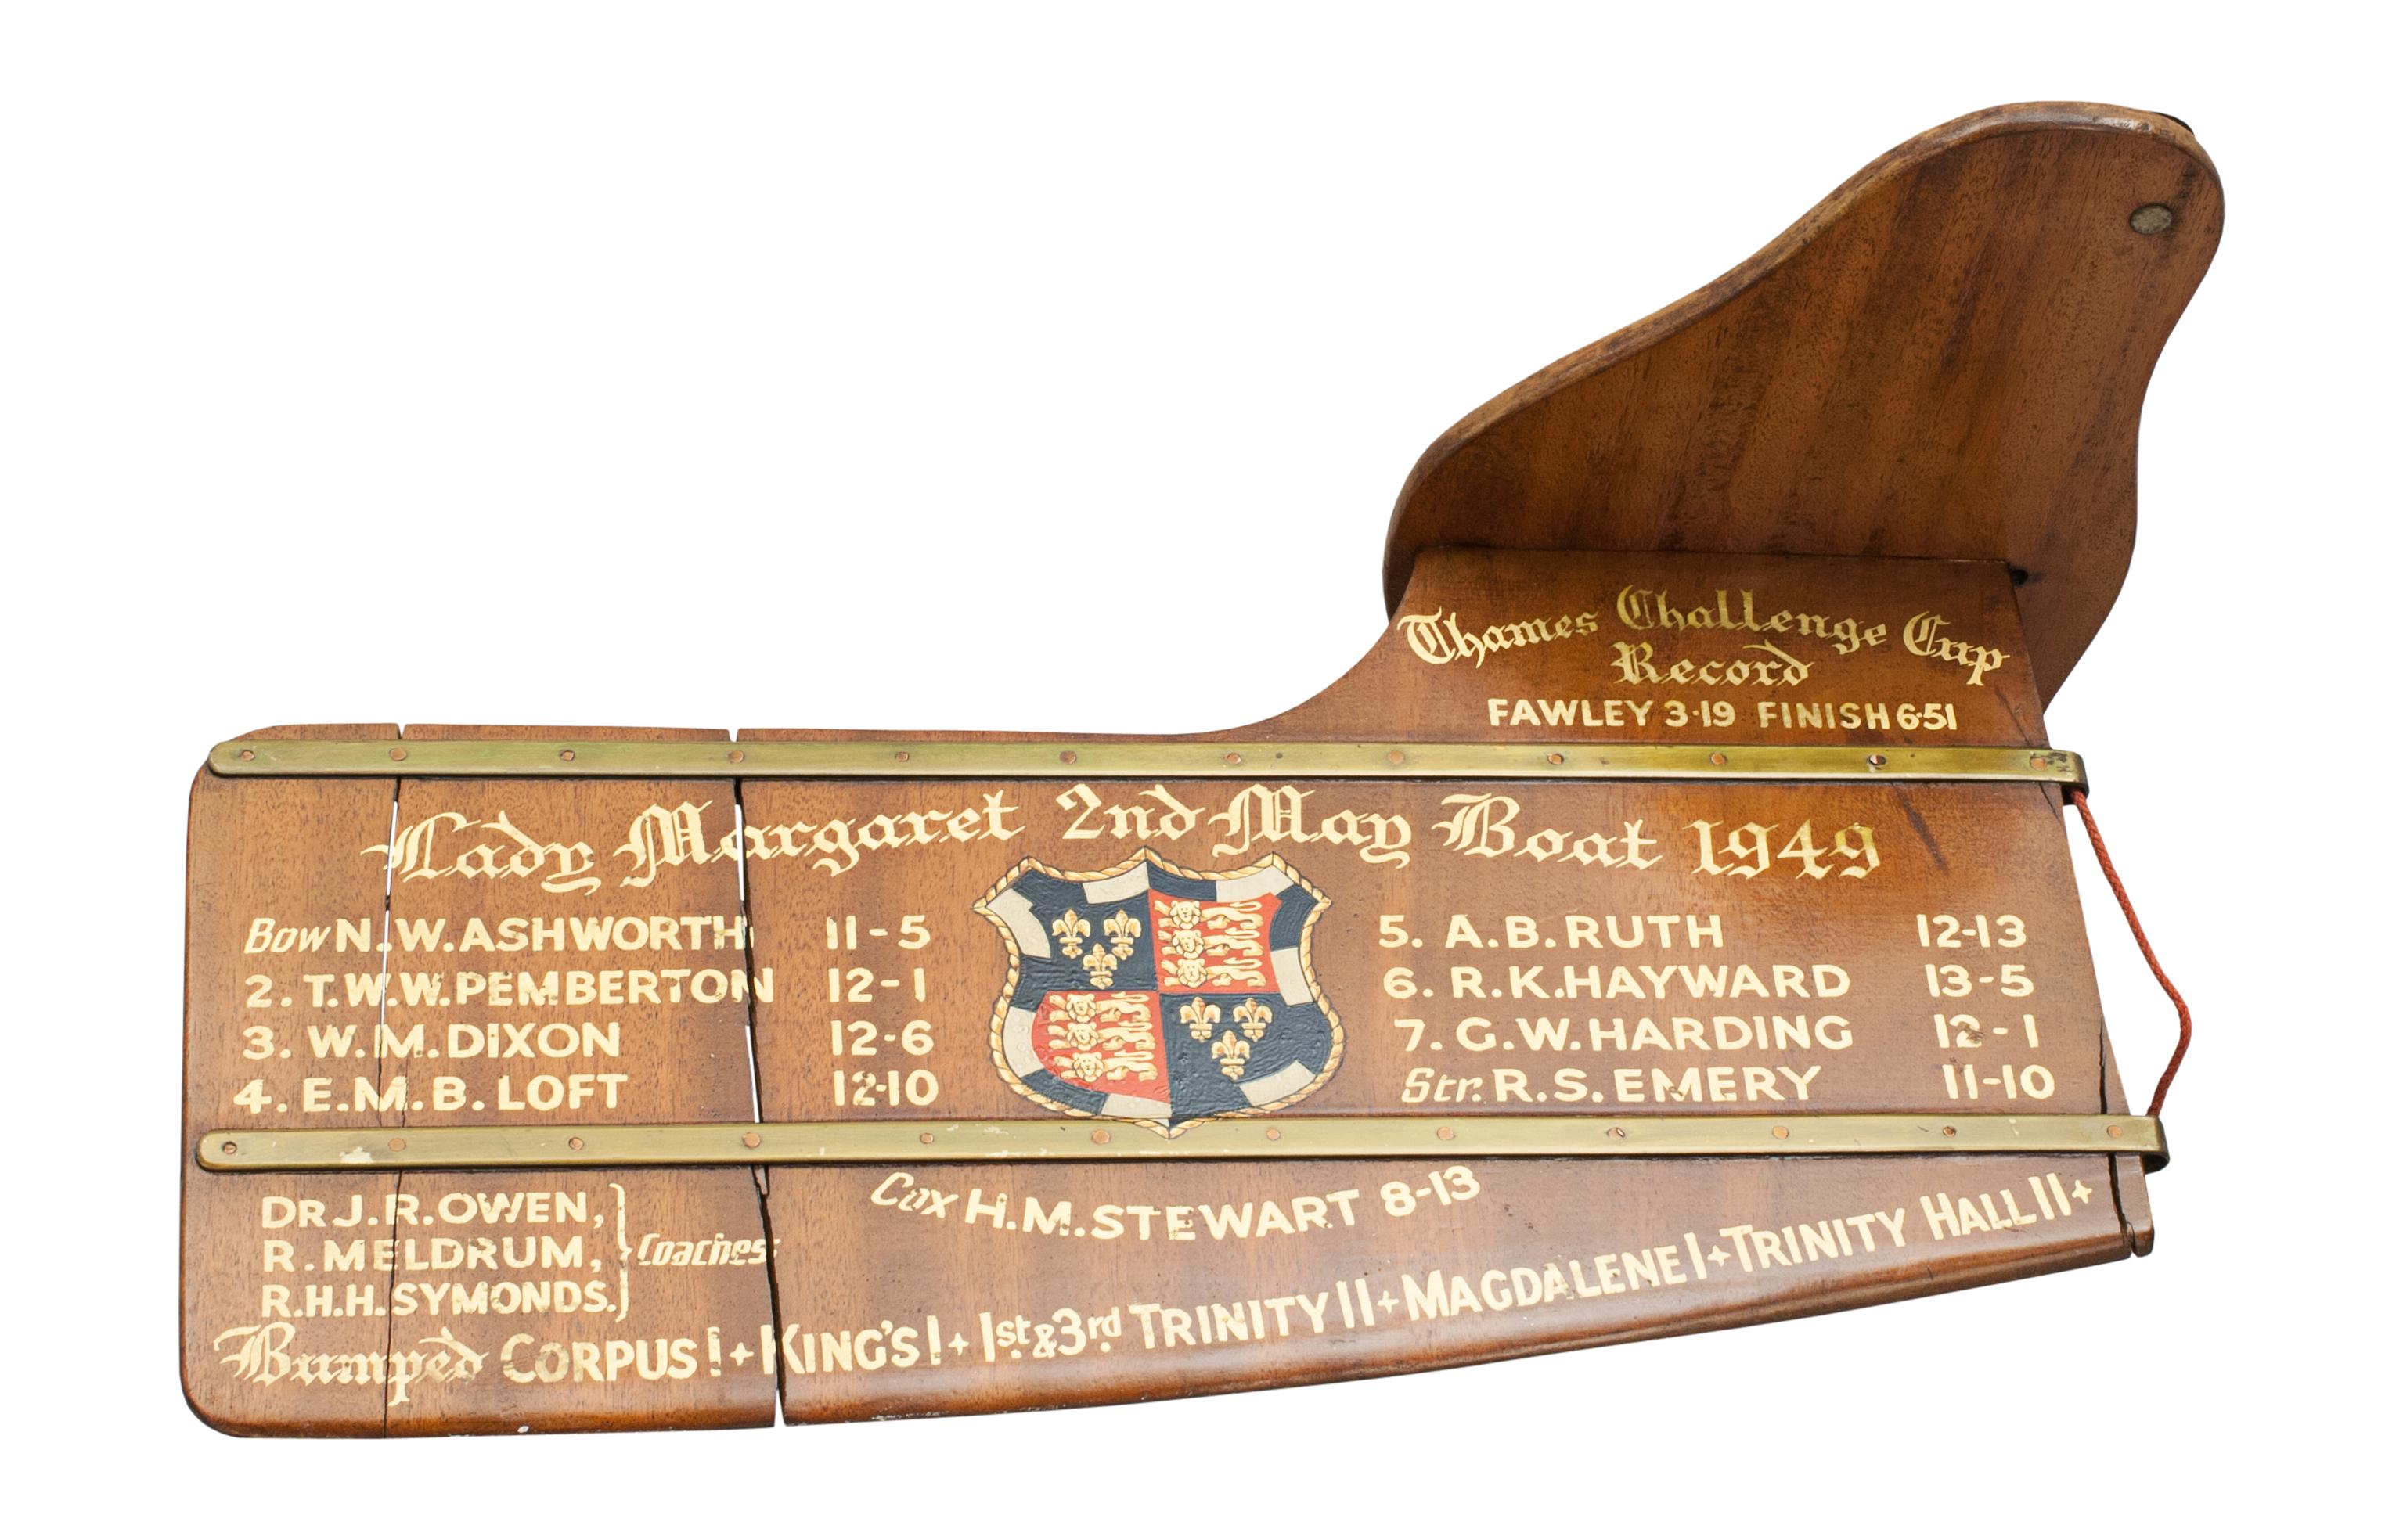 Cambridge University Rowing Rudder.
An original presentation trophy rudder 'Lady Margaret 2nd May Boat' with gold calligraphy and college insignia. This is the former property of H.M. Stewart who was the cox. The college crest is of St John's